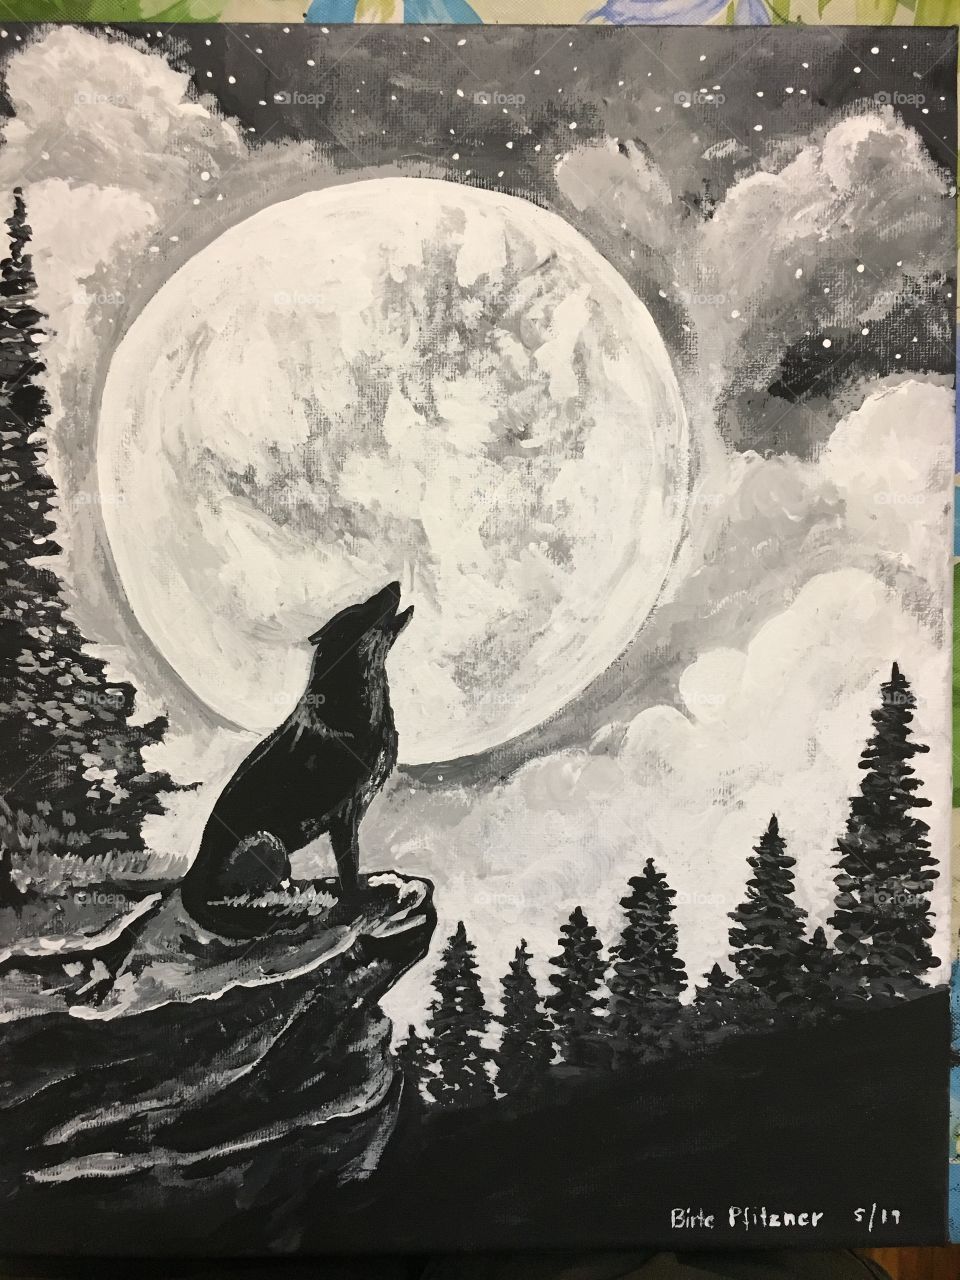 My painting from a painting